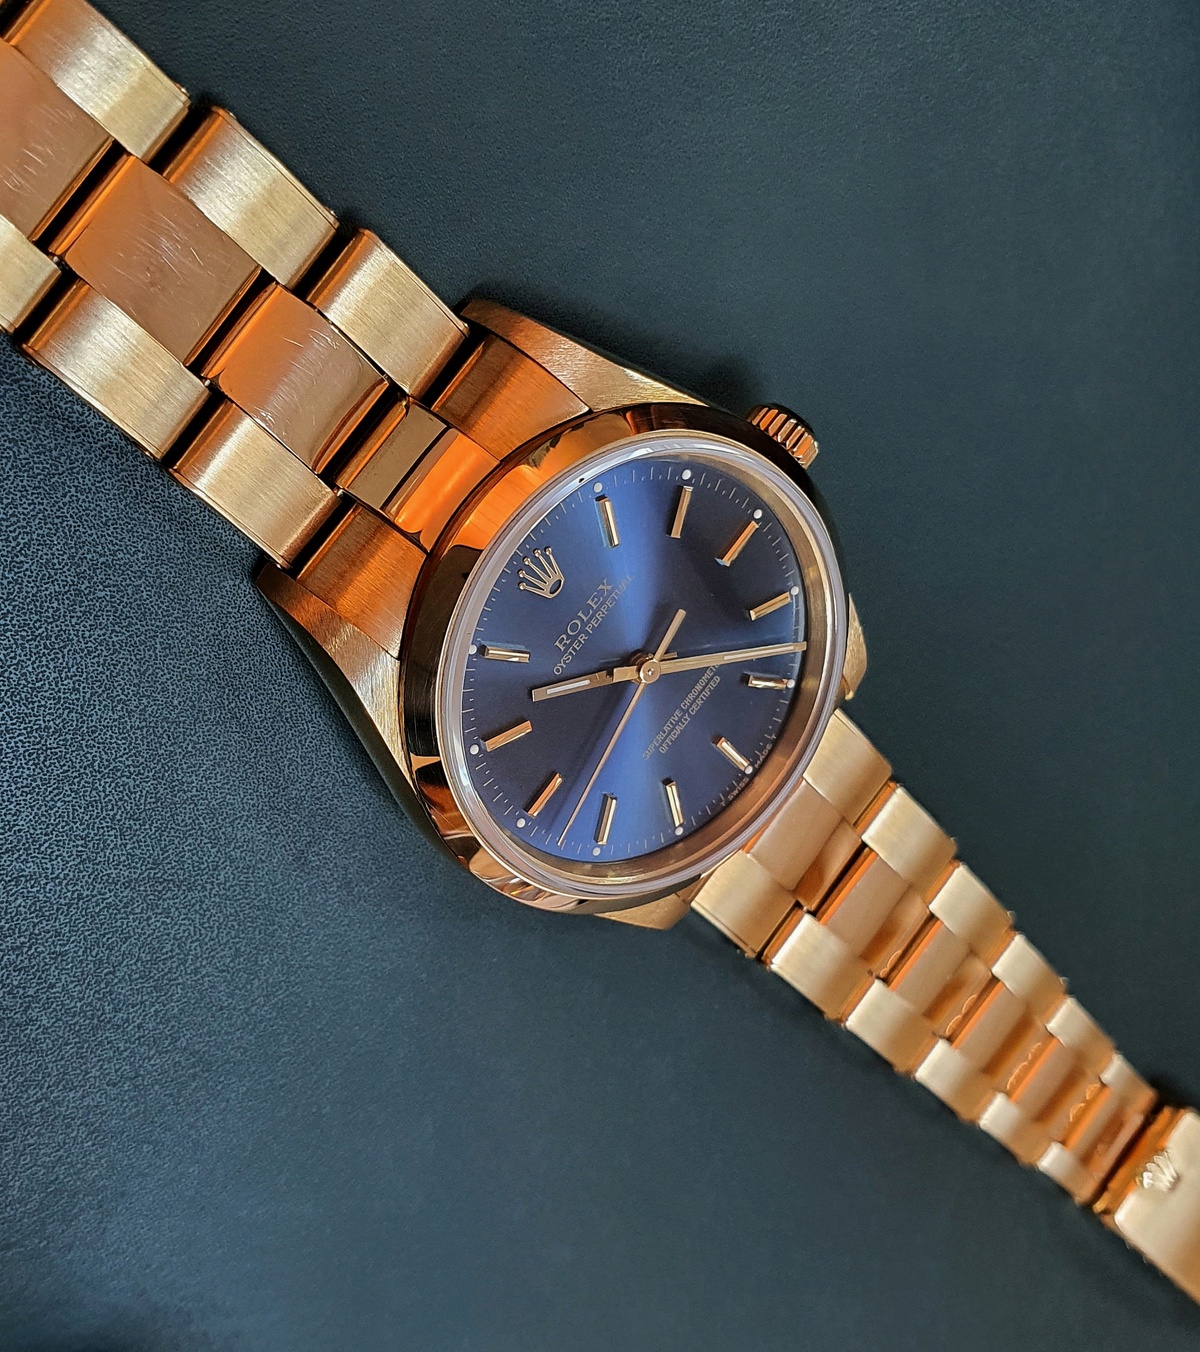 Rolex Oyster Perpetual 18k blue dial